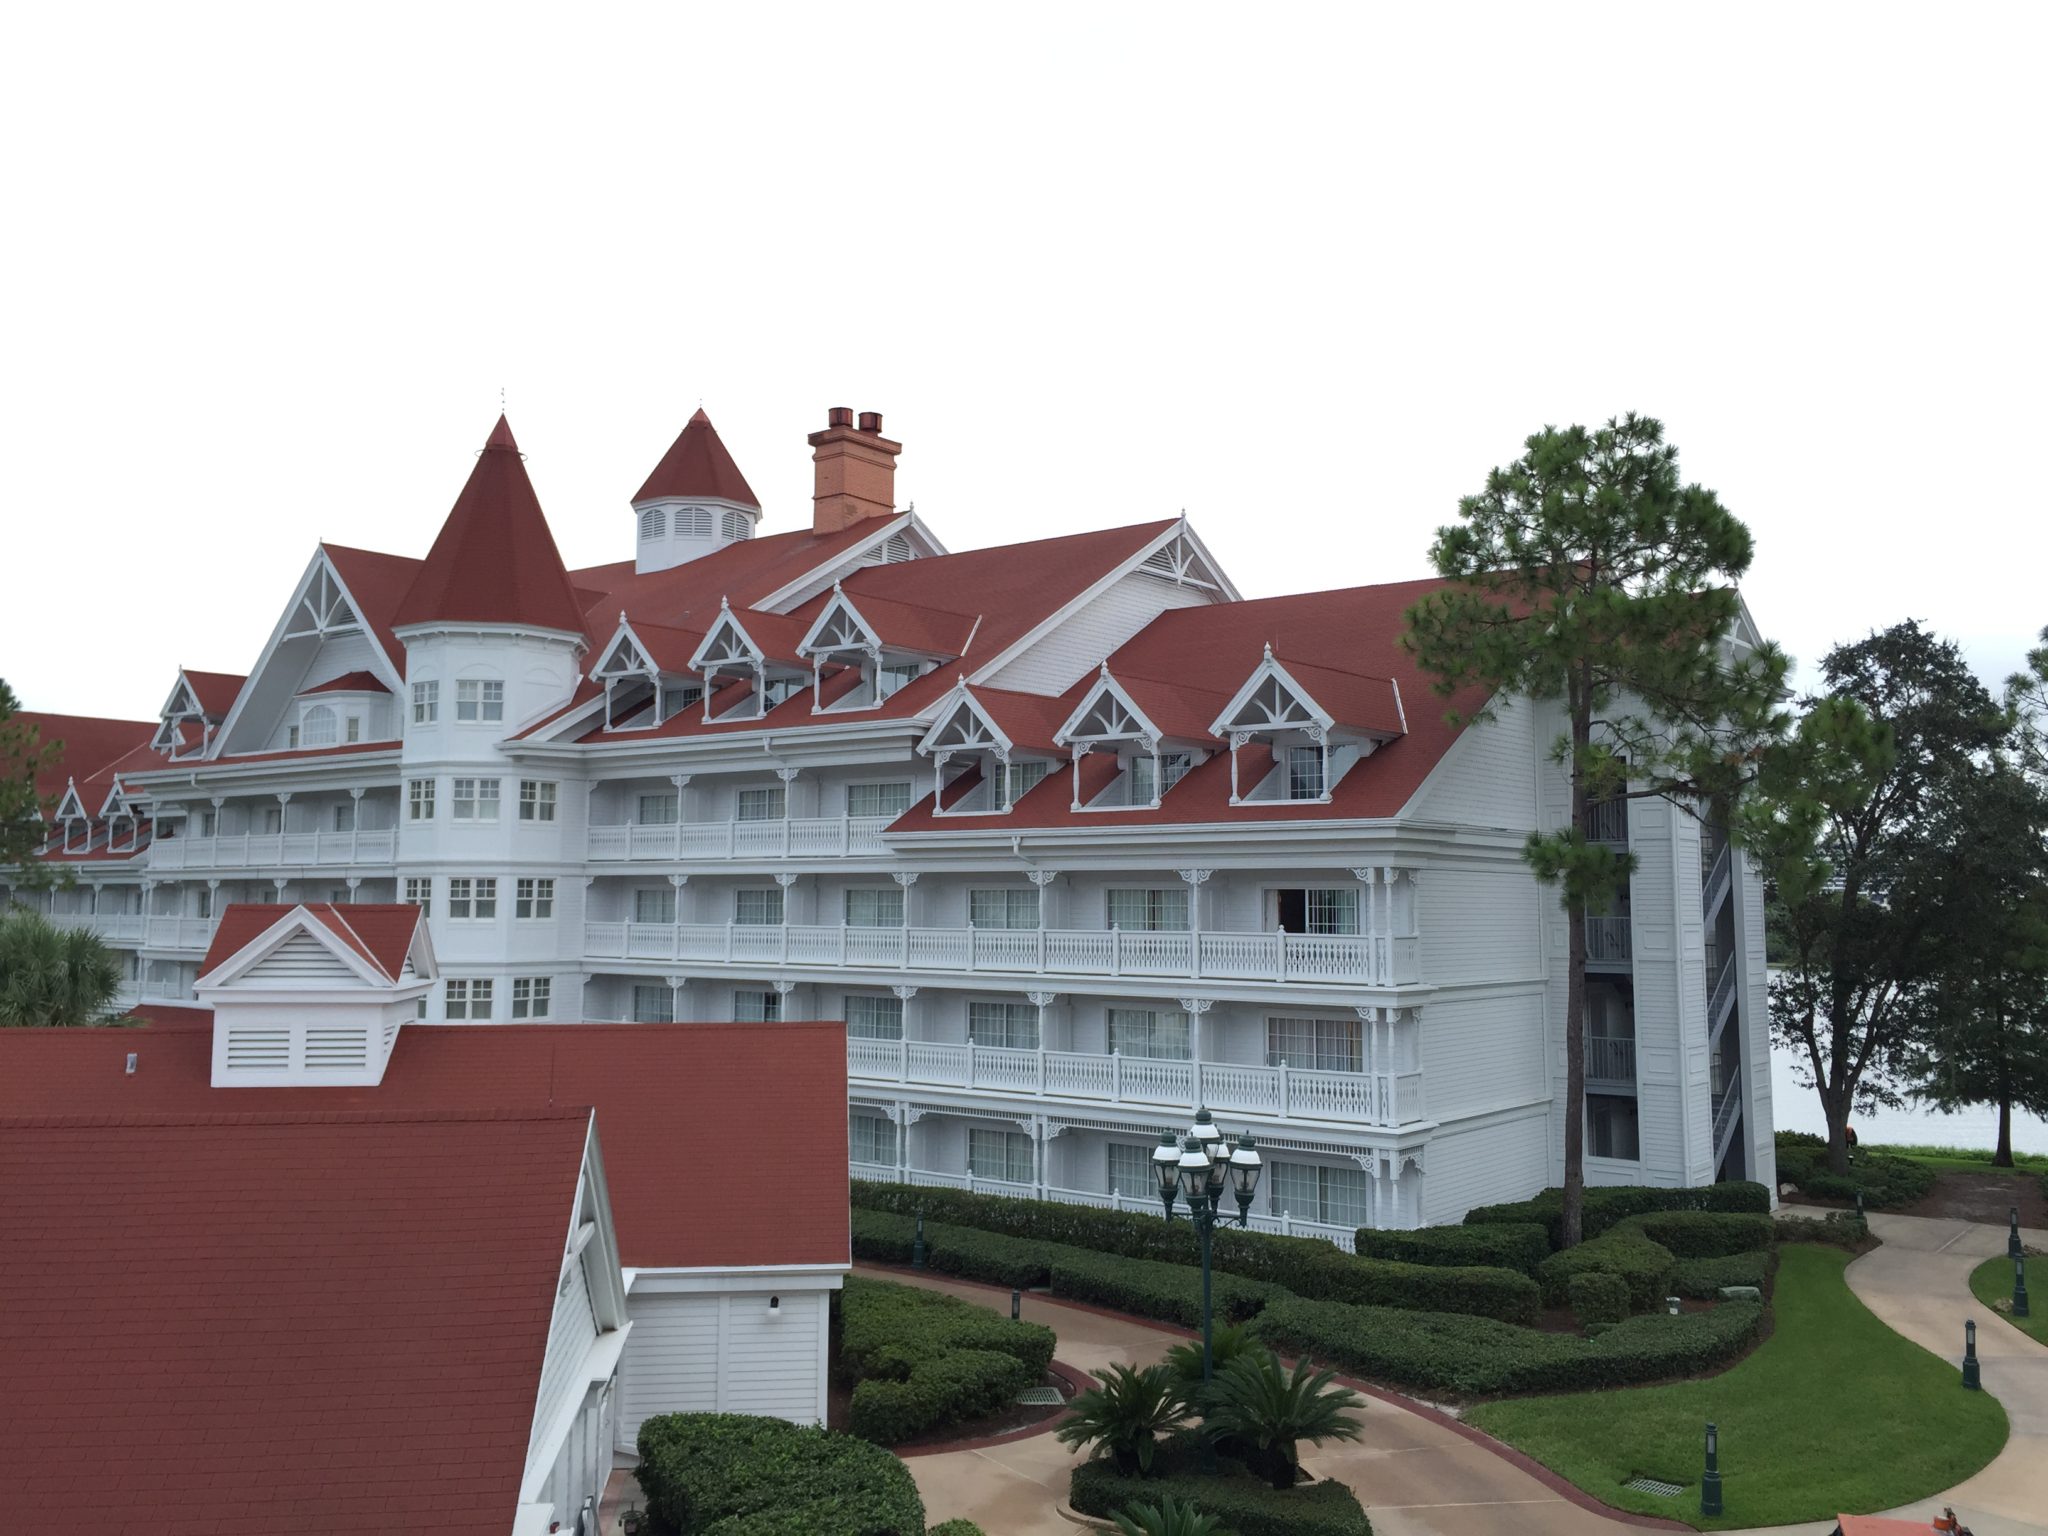 A Peek Inside the Refurbished Guest Rooms at Disney’s Grand Floridian Resort